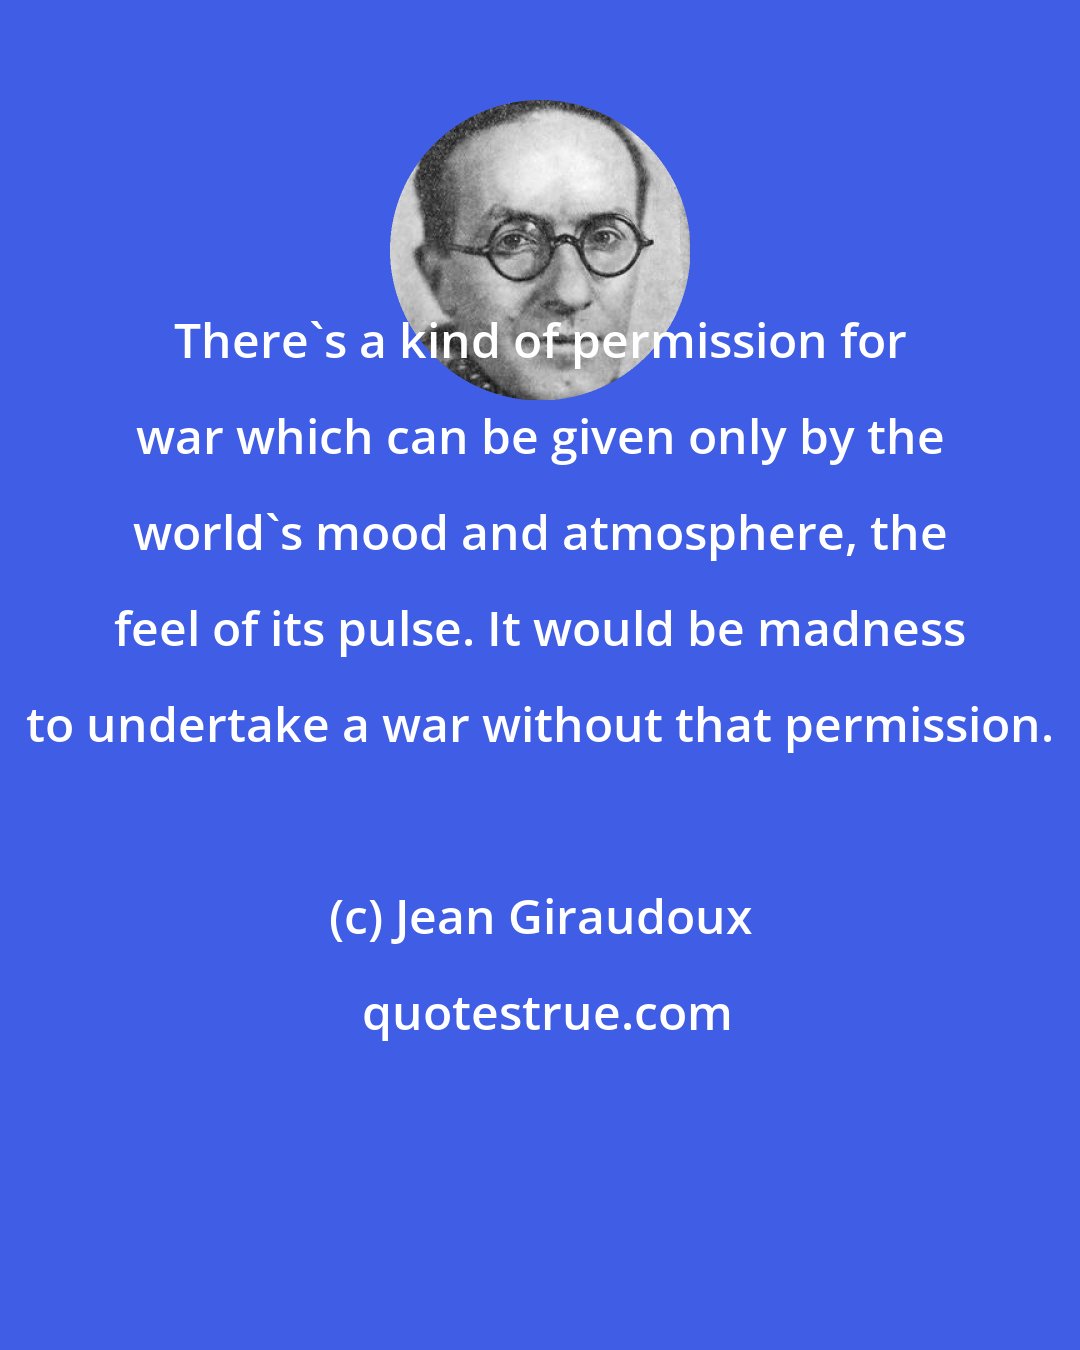 Jean Giraudoux: There's a kind of permission for war which can be given only by the world's mood and atmosphere, the feel of its pulse. It would be madness to undertake a war without that permission.